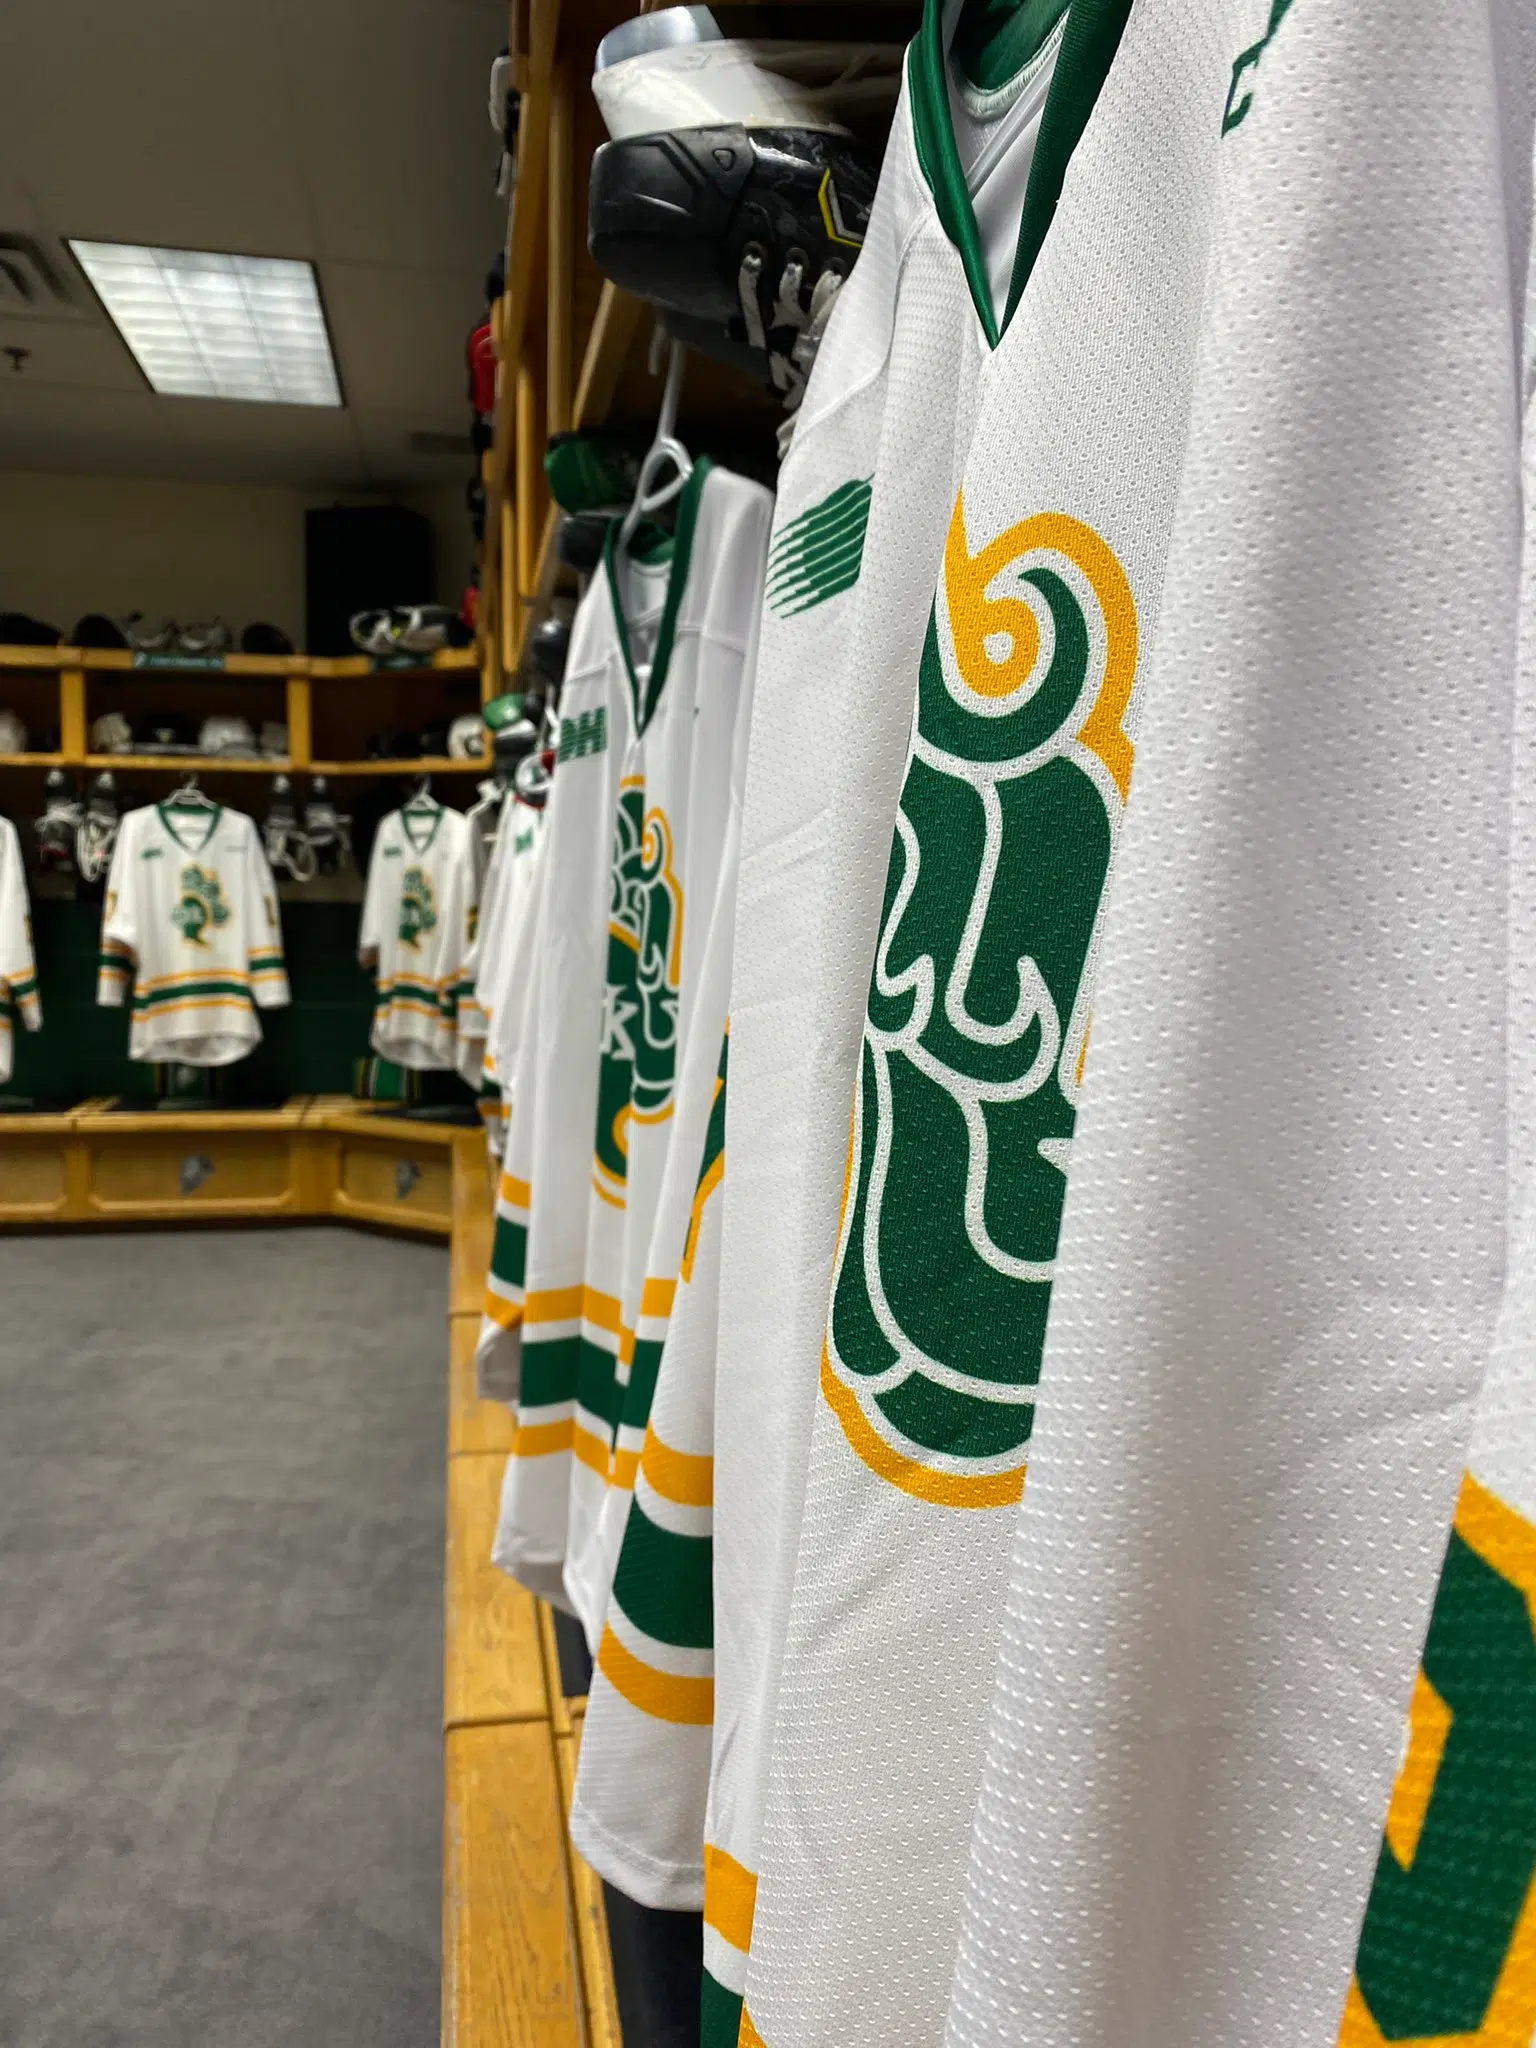 London Knights on Instagram: Design a London Knights home jersey! Submit  your design ideas by June 13th 2022. We'll turn the best one into an actual  game jersey next season. Get the